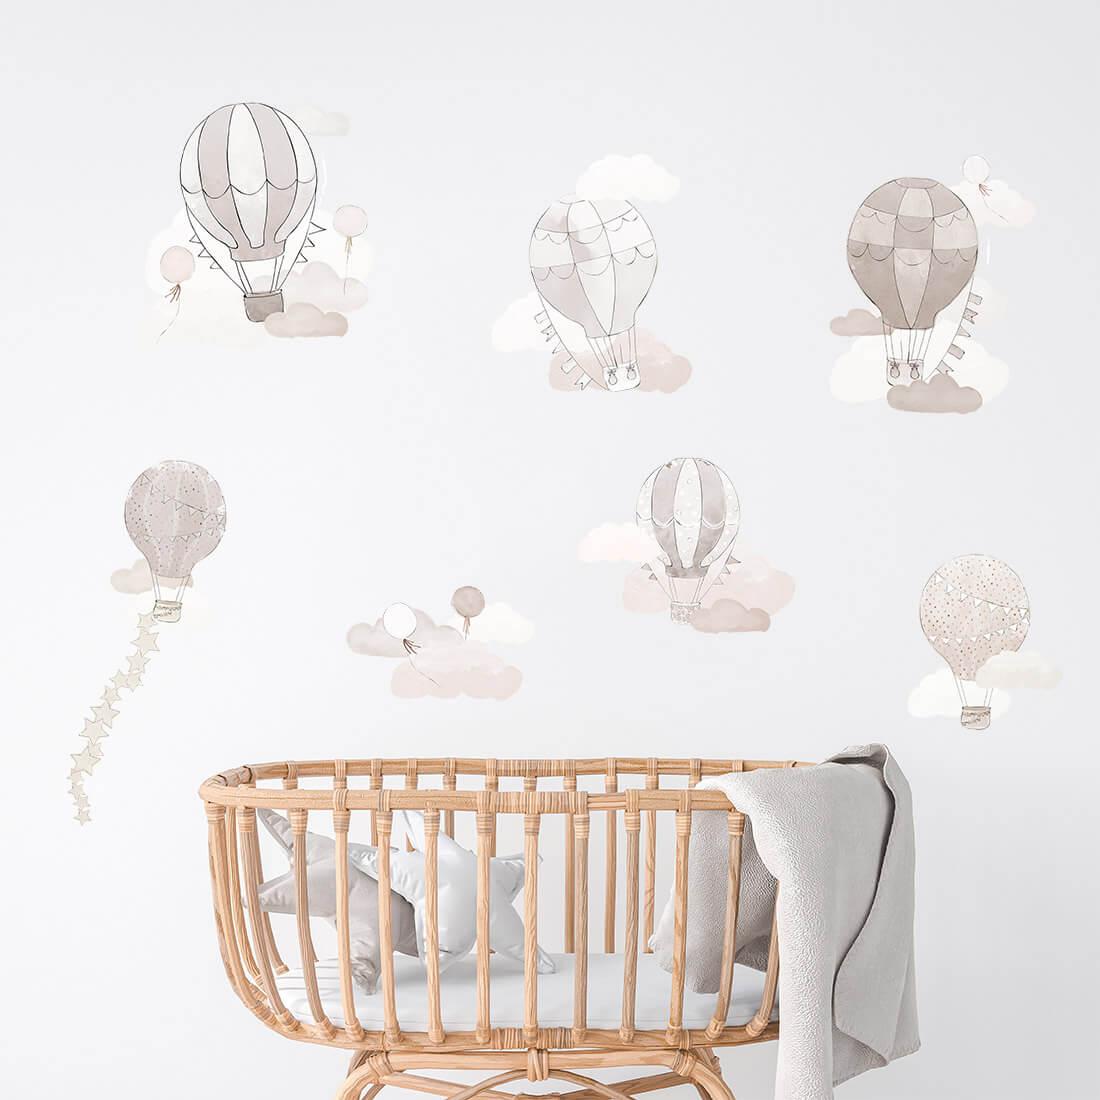 Wall Stickers - Beige Balloons